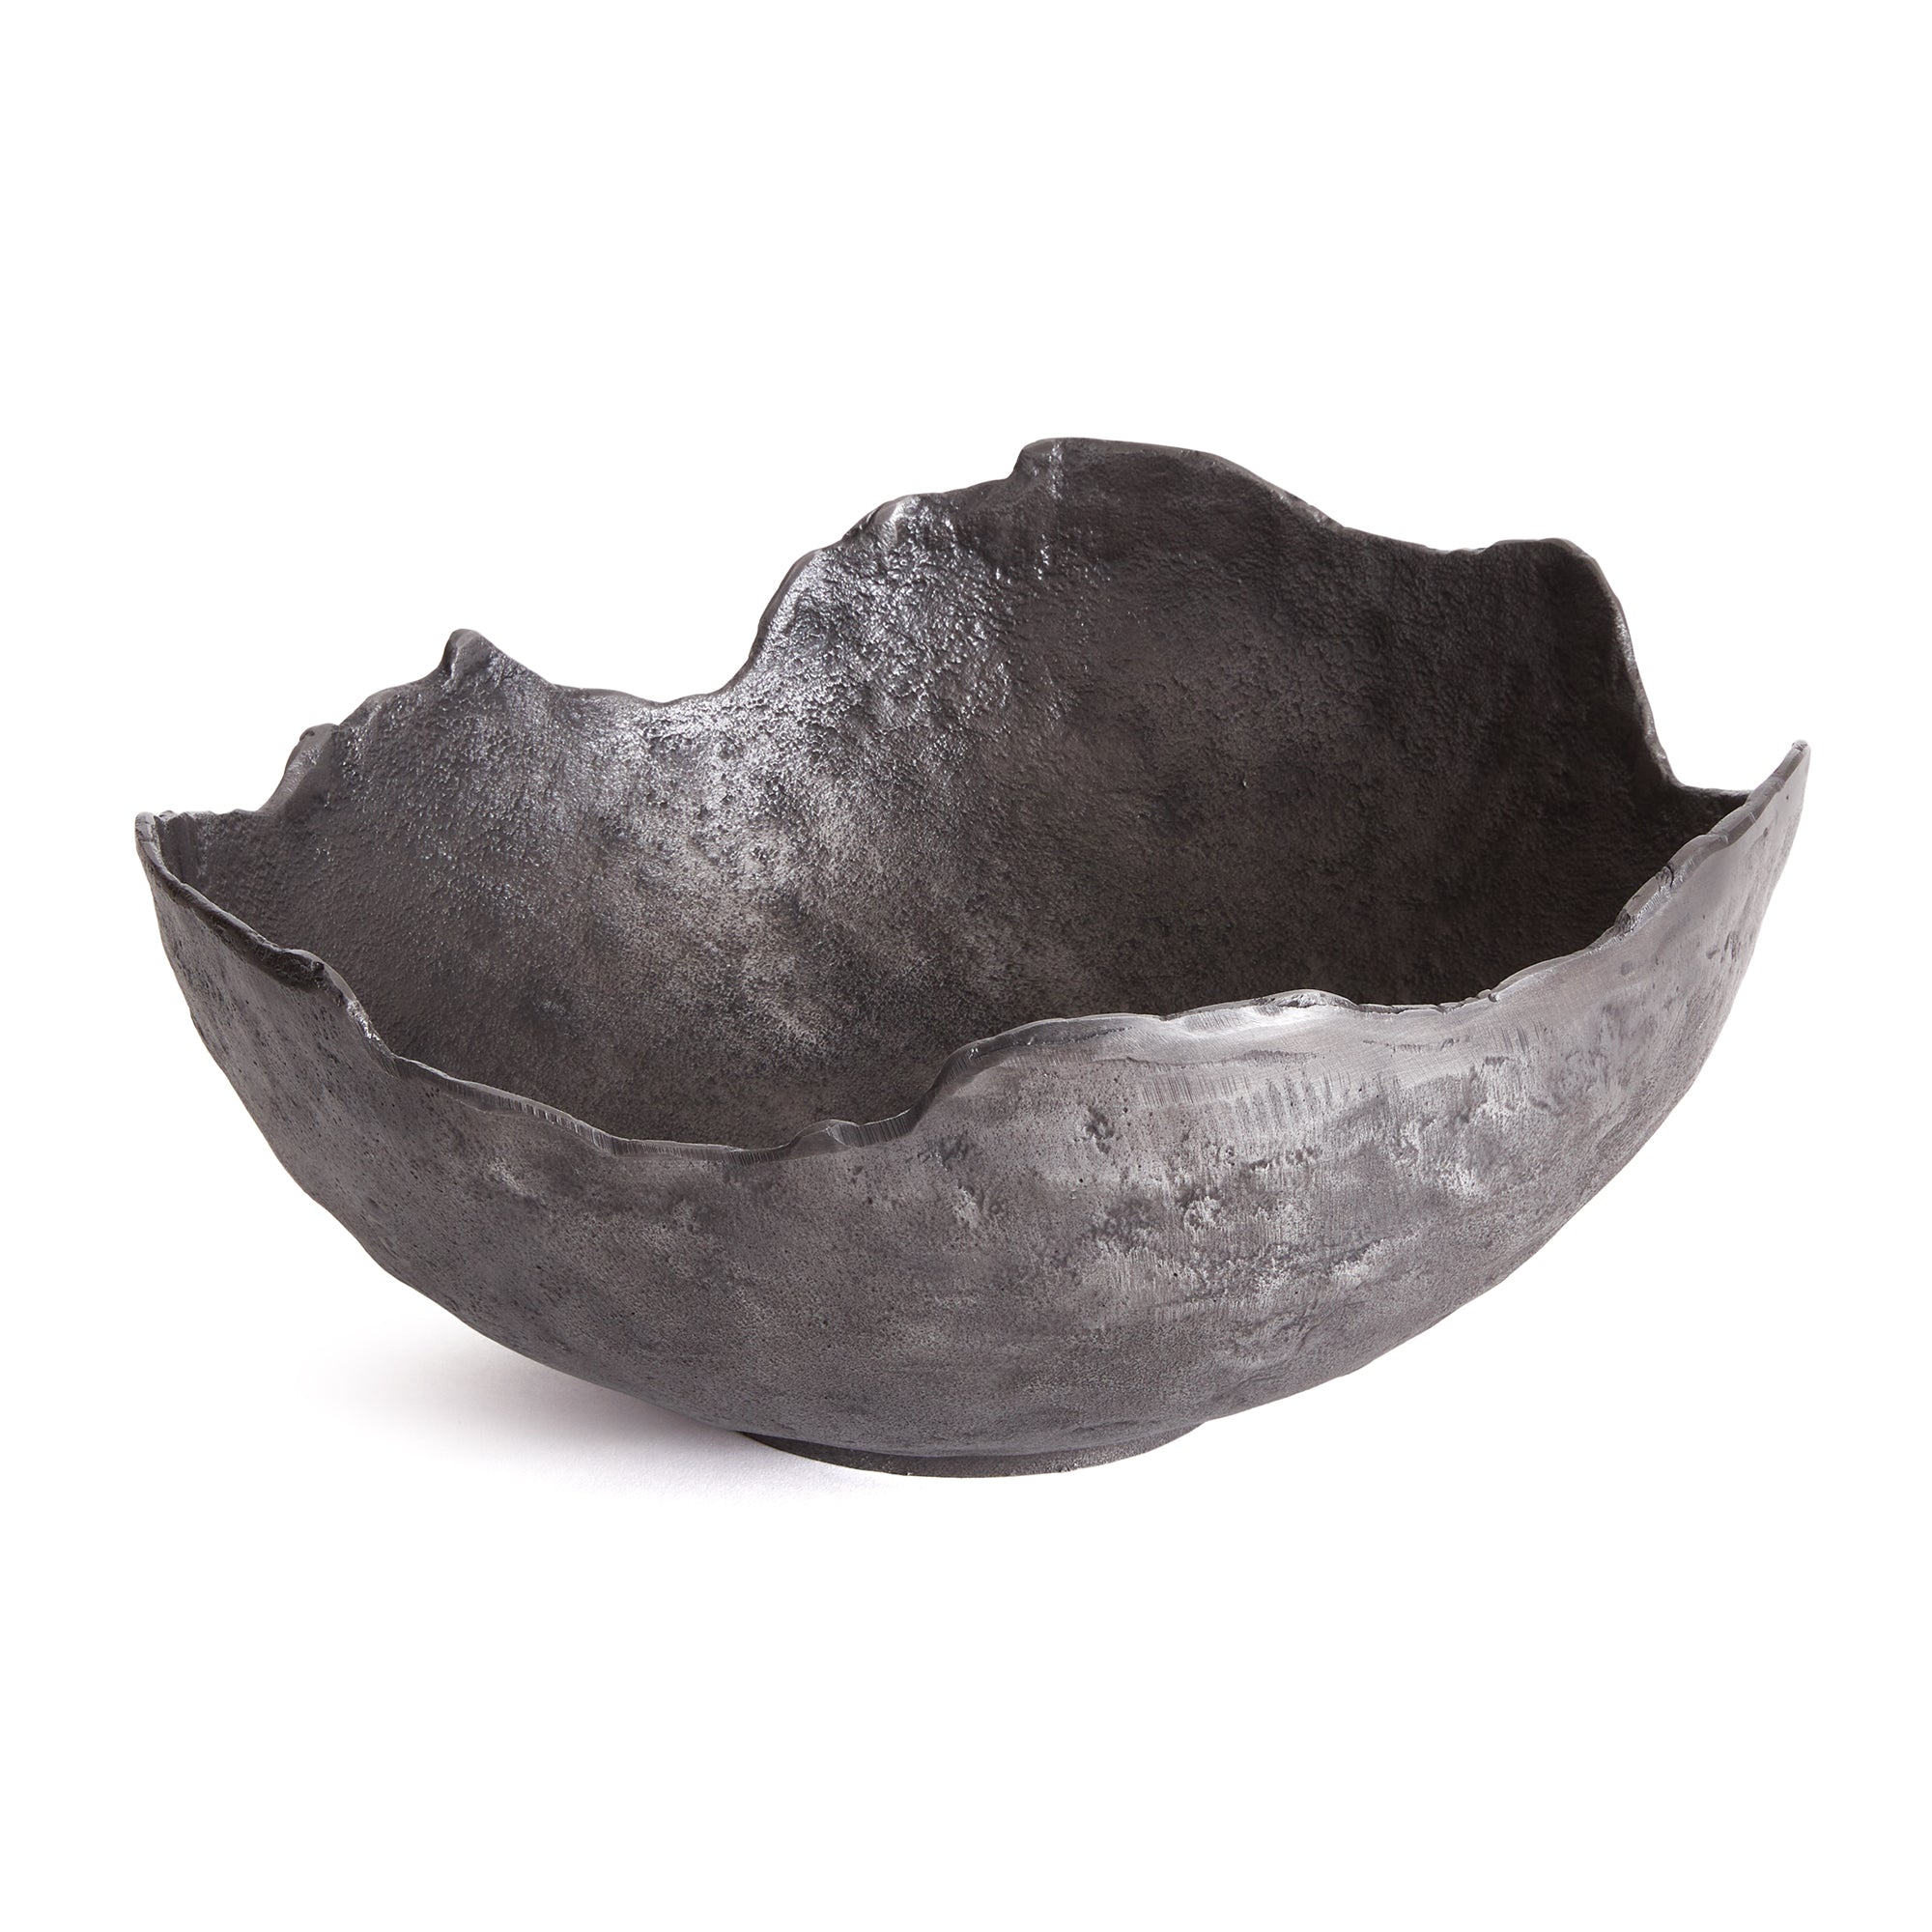 This decorative hand-sculpted bowl is made to be on display. With an oil-rubbed bronze finish and irregular edge, styled or just as it is, a strong statement for the modern space. The epitome of functional art. Amethyst Home provides interior design, new construction, custom furniture, and area rugs in the Dallas metro area.